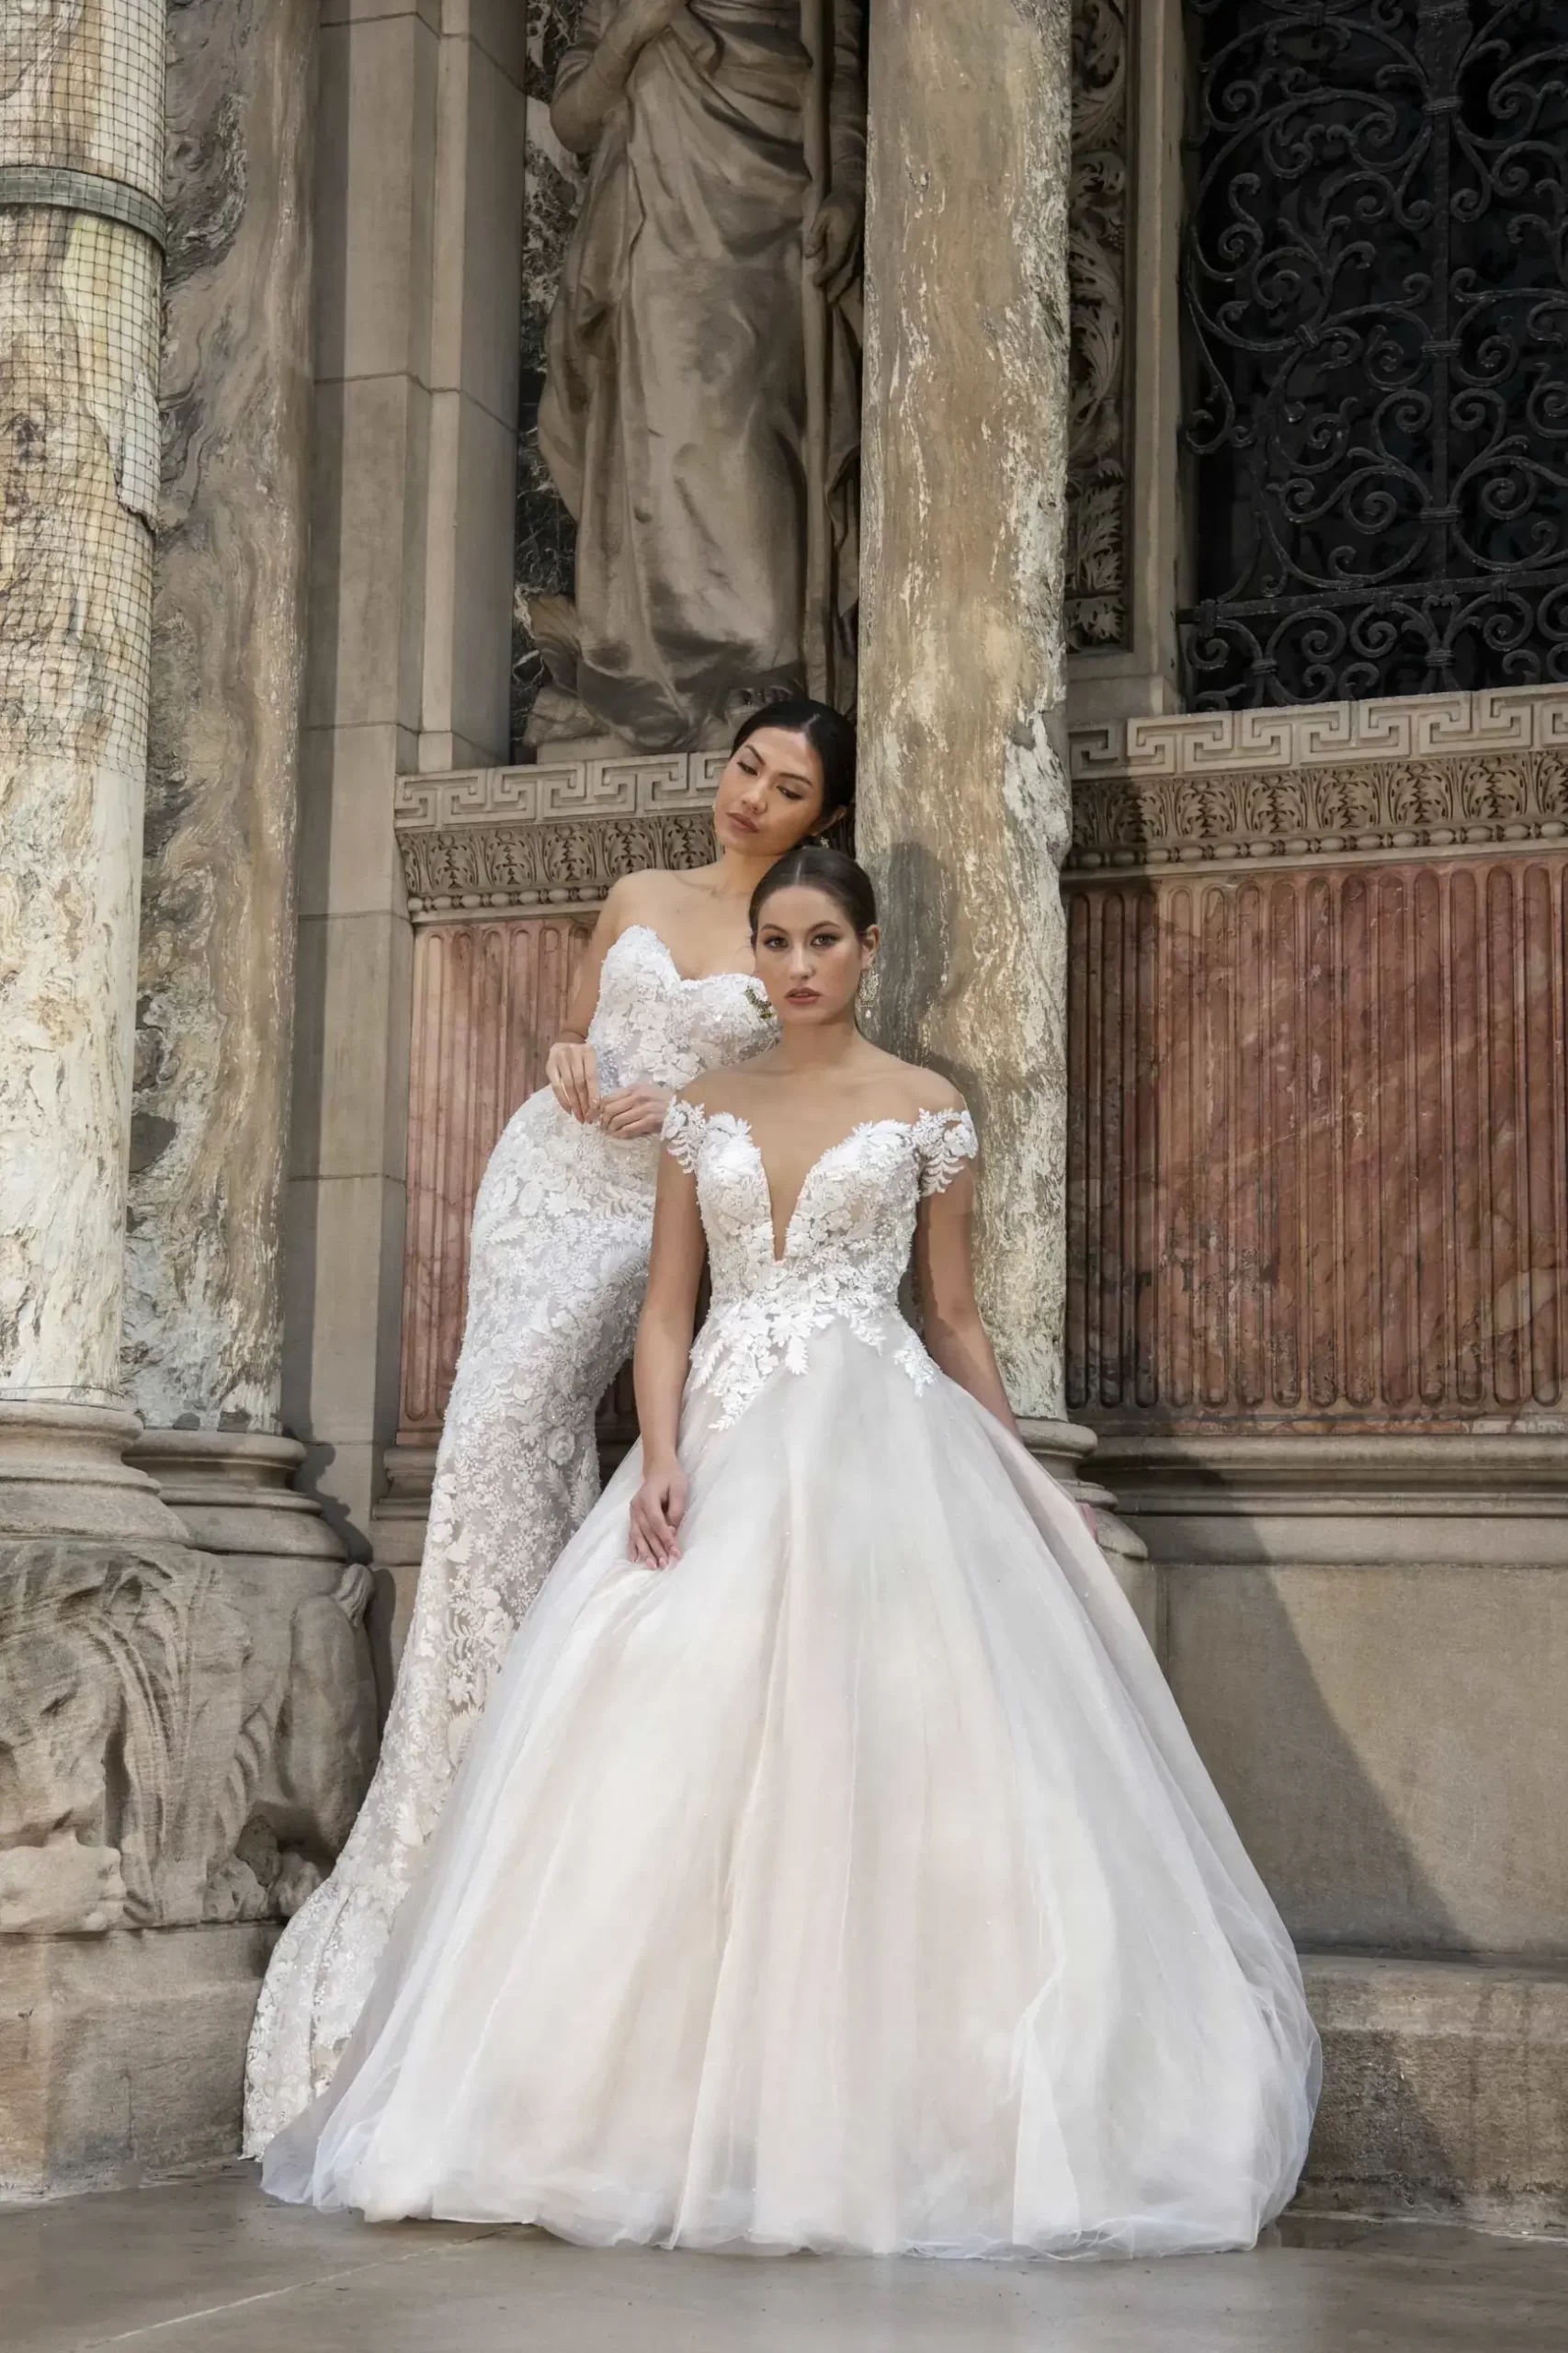 Two brides in the city